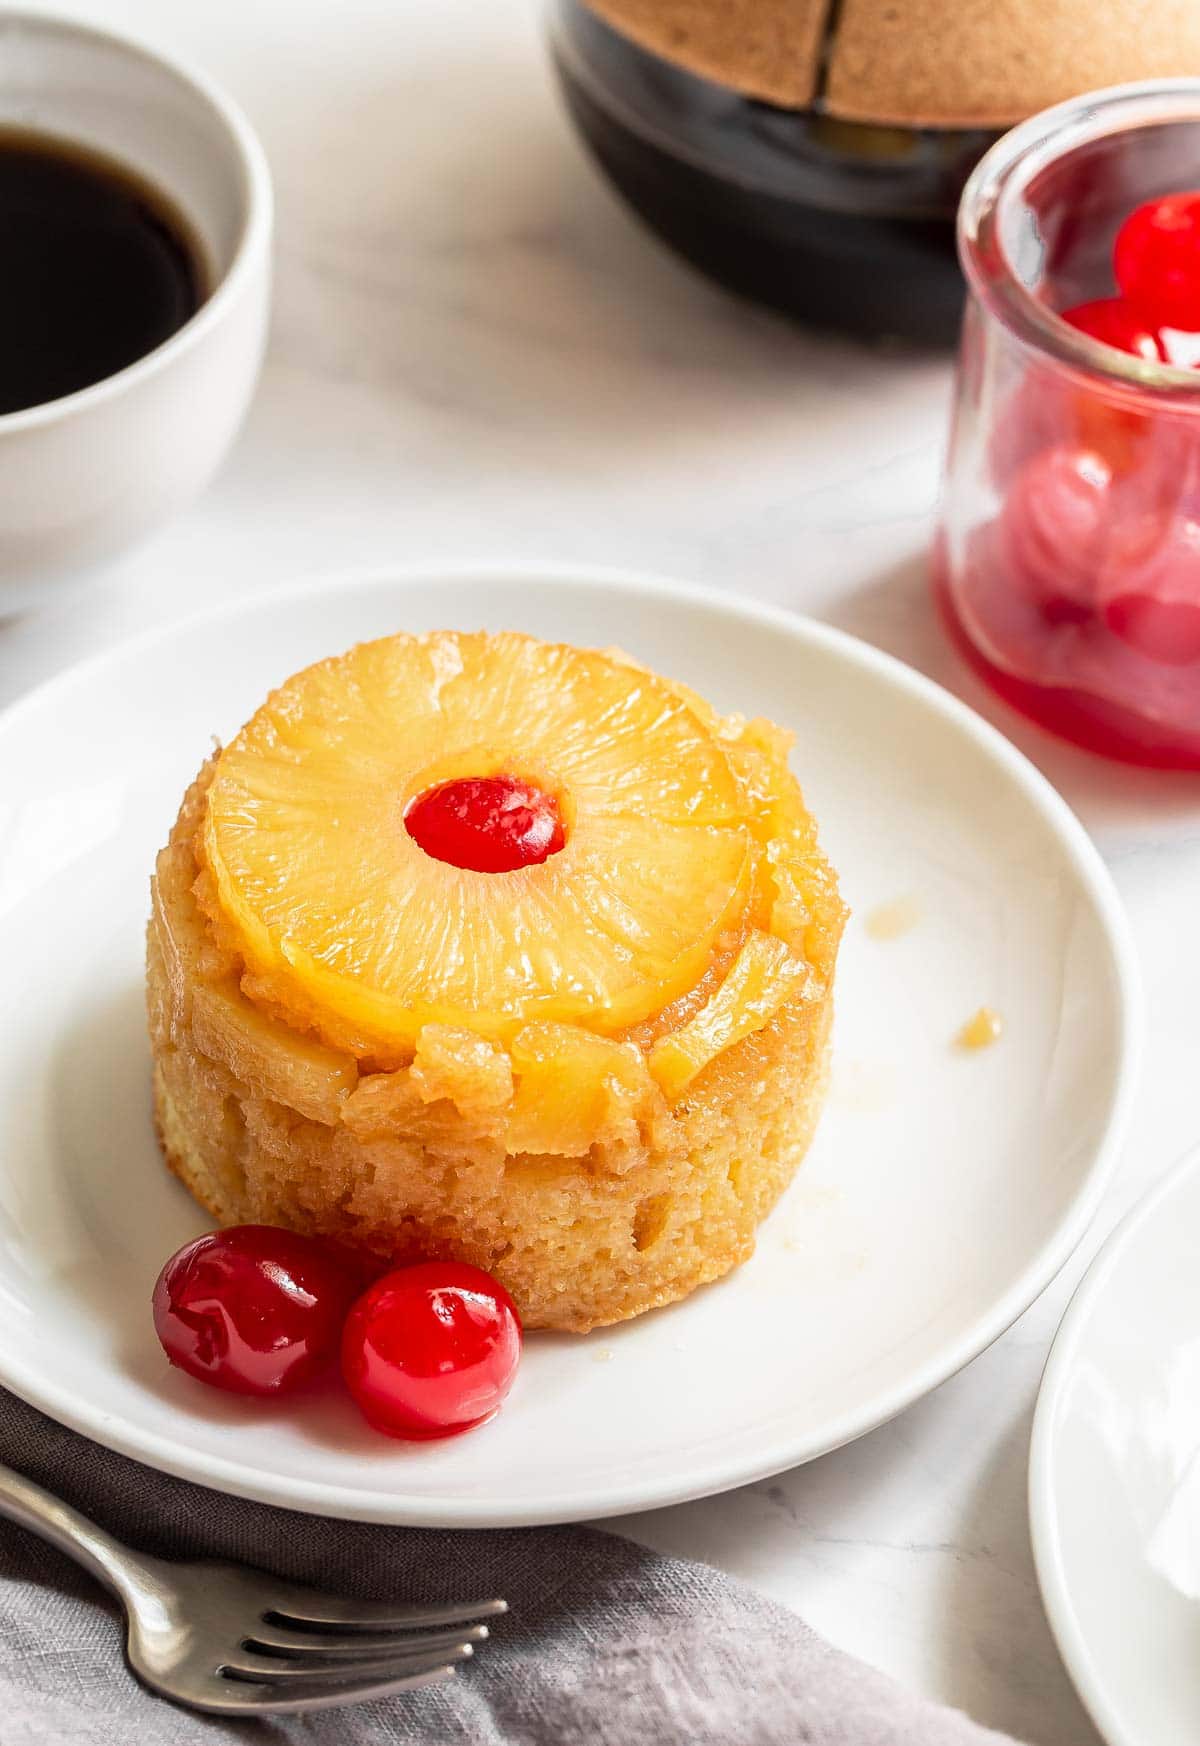 Pineapple cake on plate with red cherries.